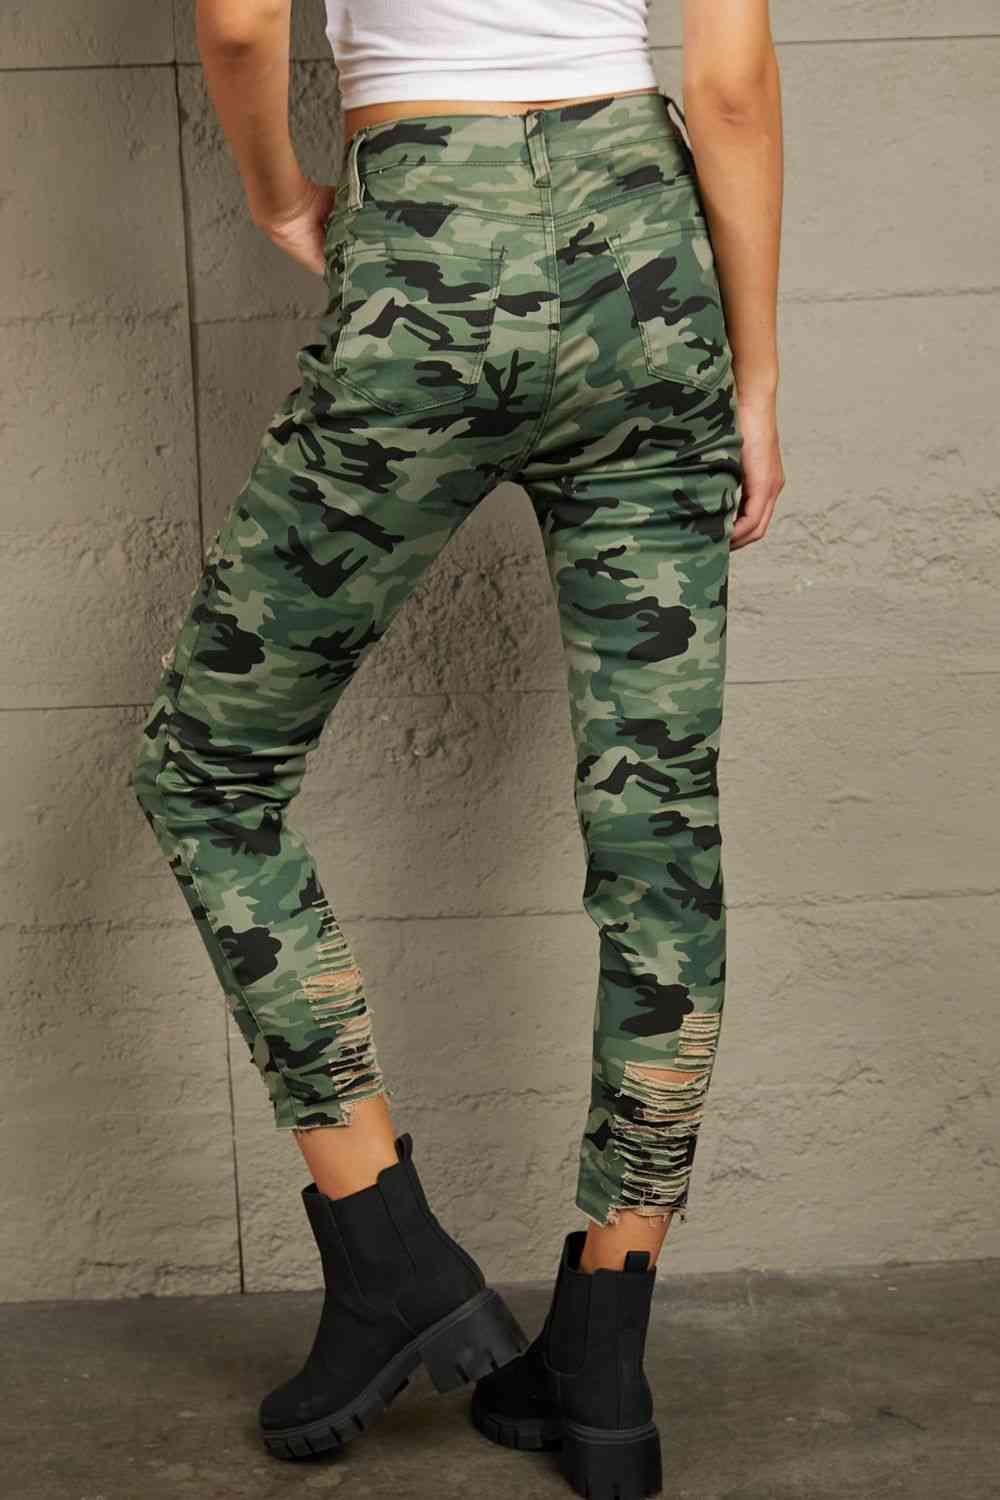 Dim Gray Baeful Distressed Camouflage Jeans Sentient Beauty Fashions Apparel &amp; Accessories